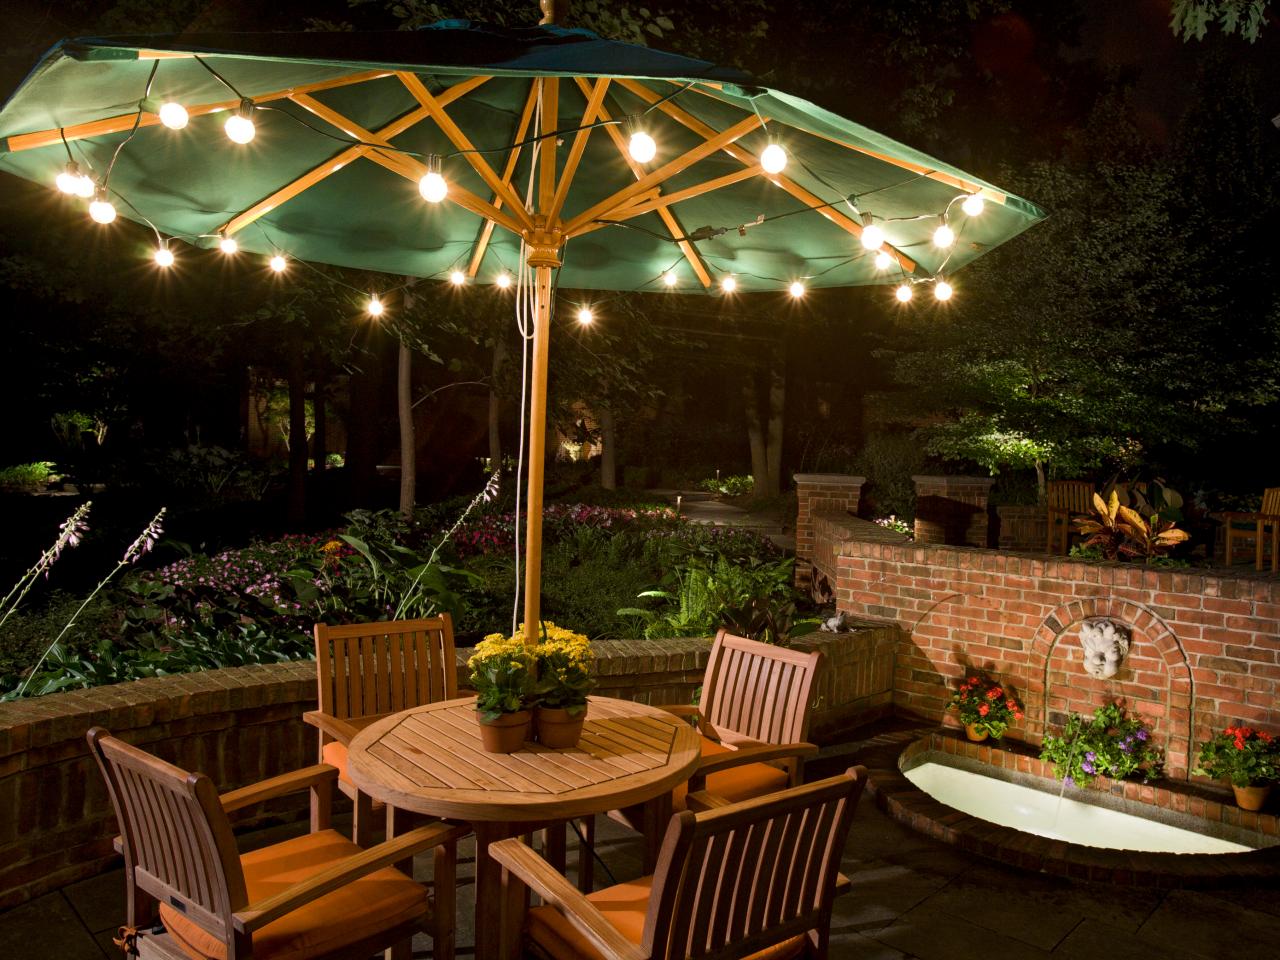 outdoor patio lights under an umbrella. inexpensive party lights give patio ... IPOXLAZ